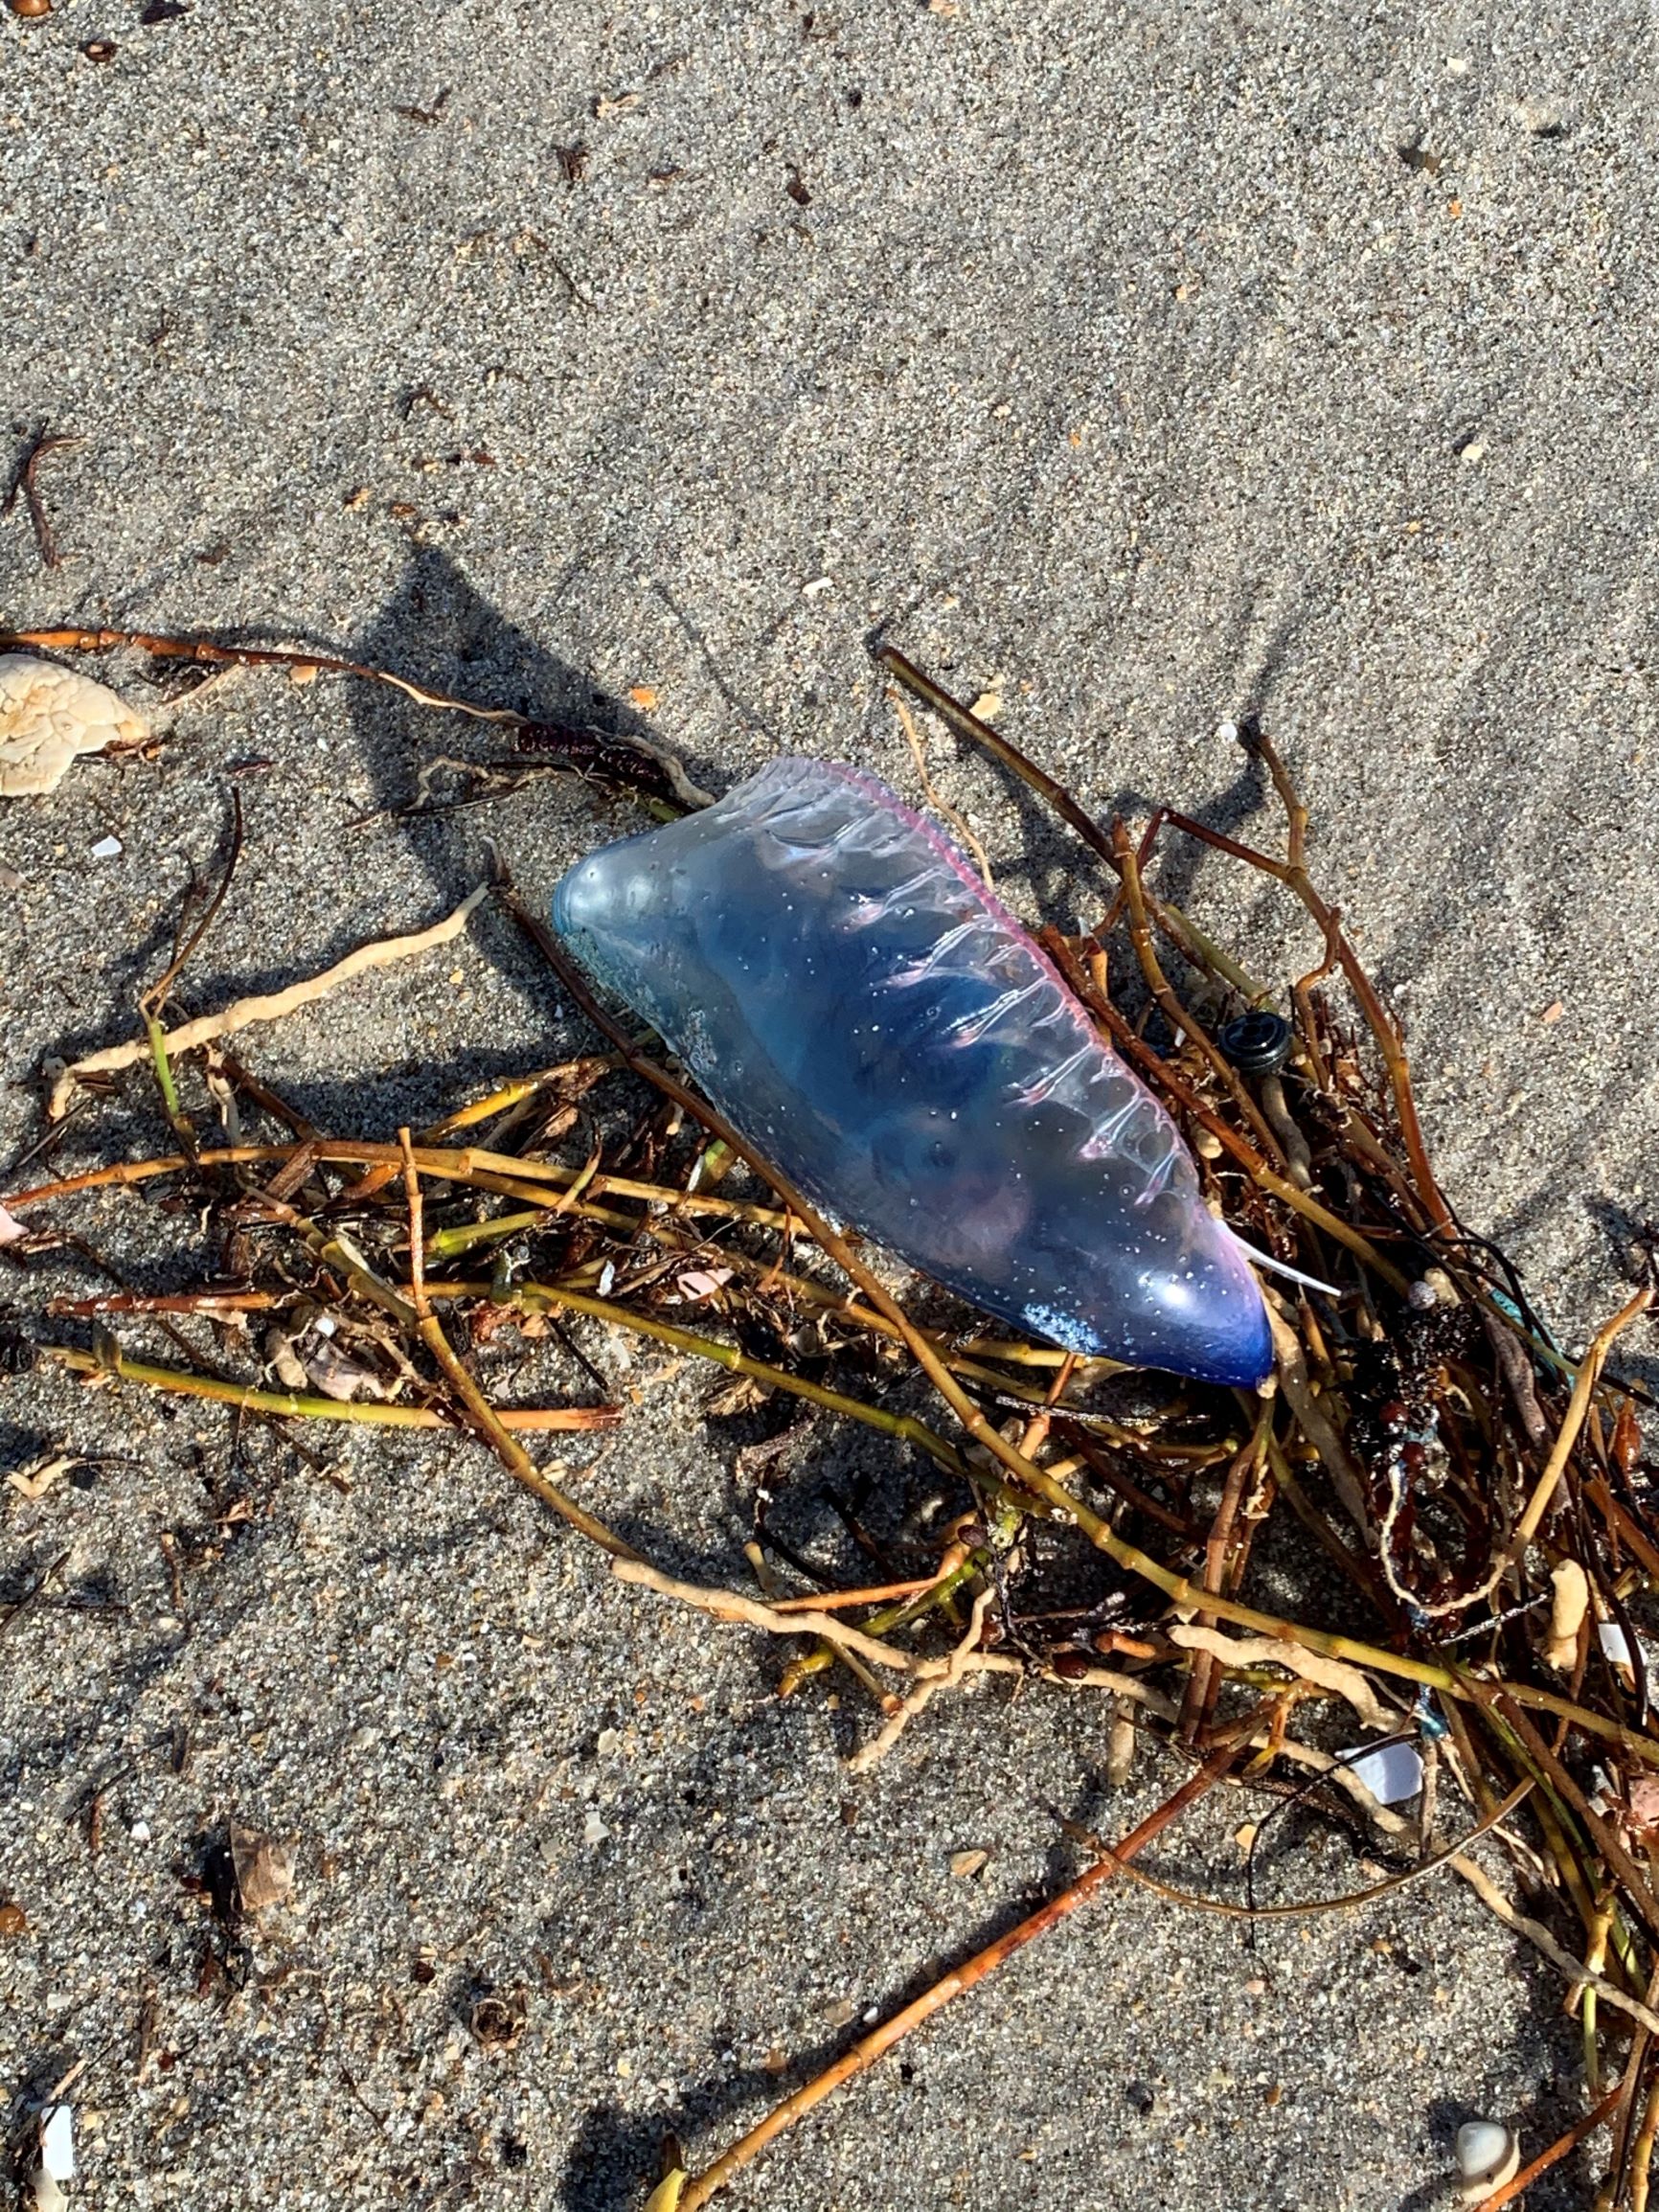 Portuguese Man-of-War. Ruffled pink edge is the top of the float sac.